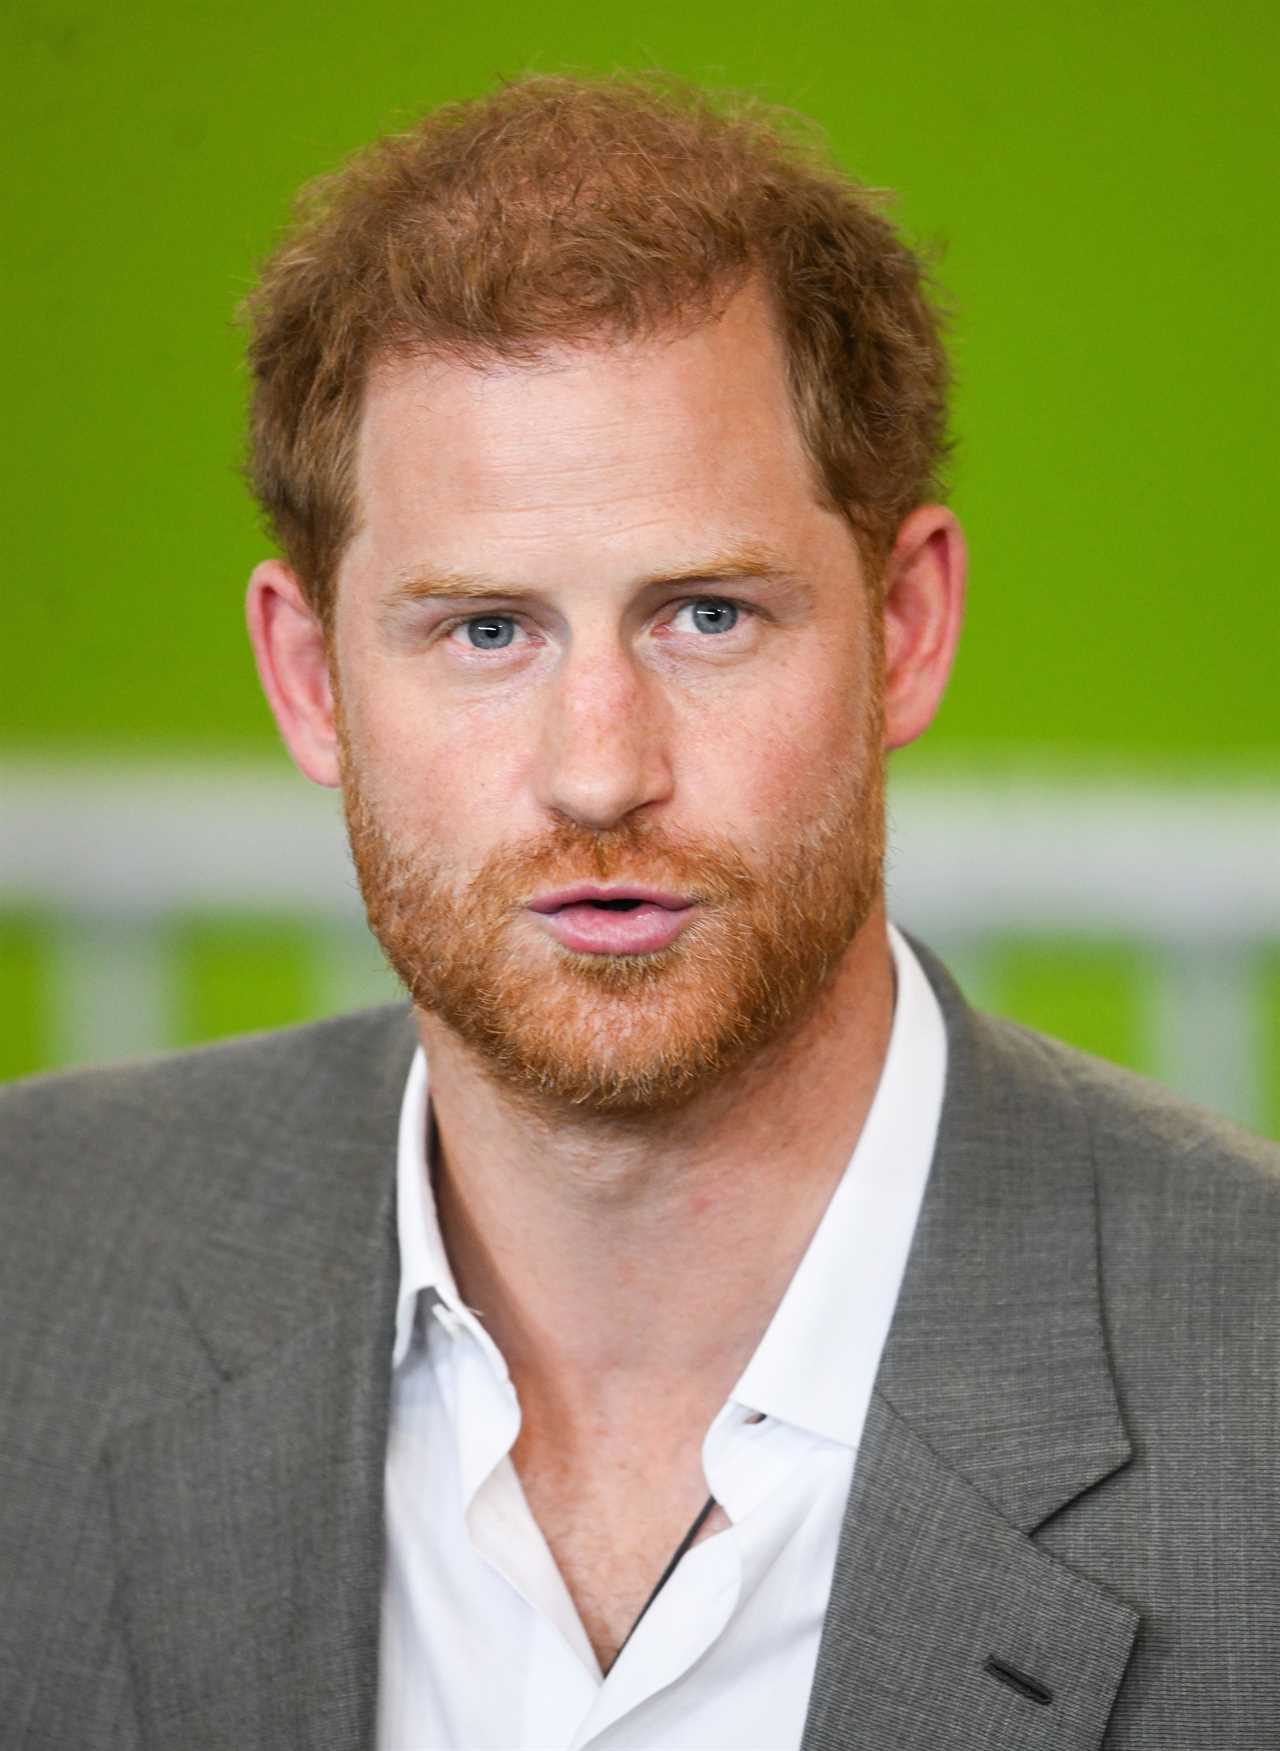 Prince Harry lost his virginity in our field – I could put up a blue plaque